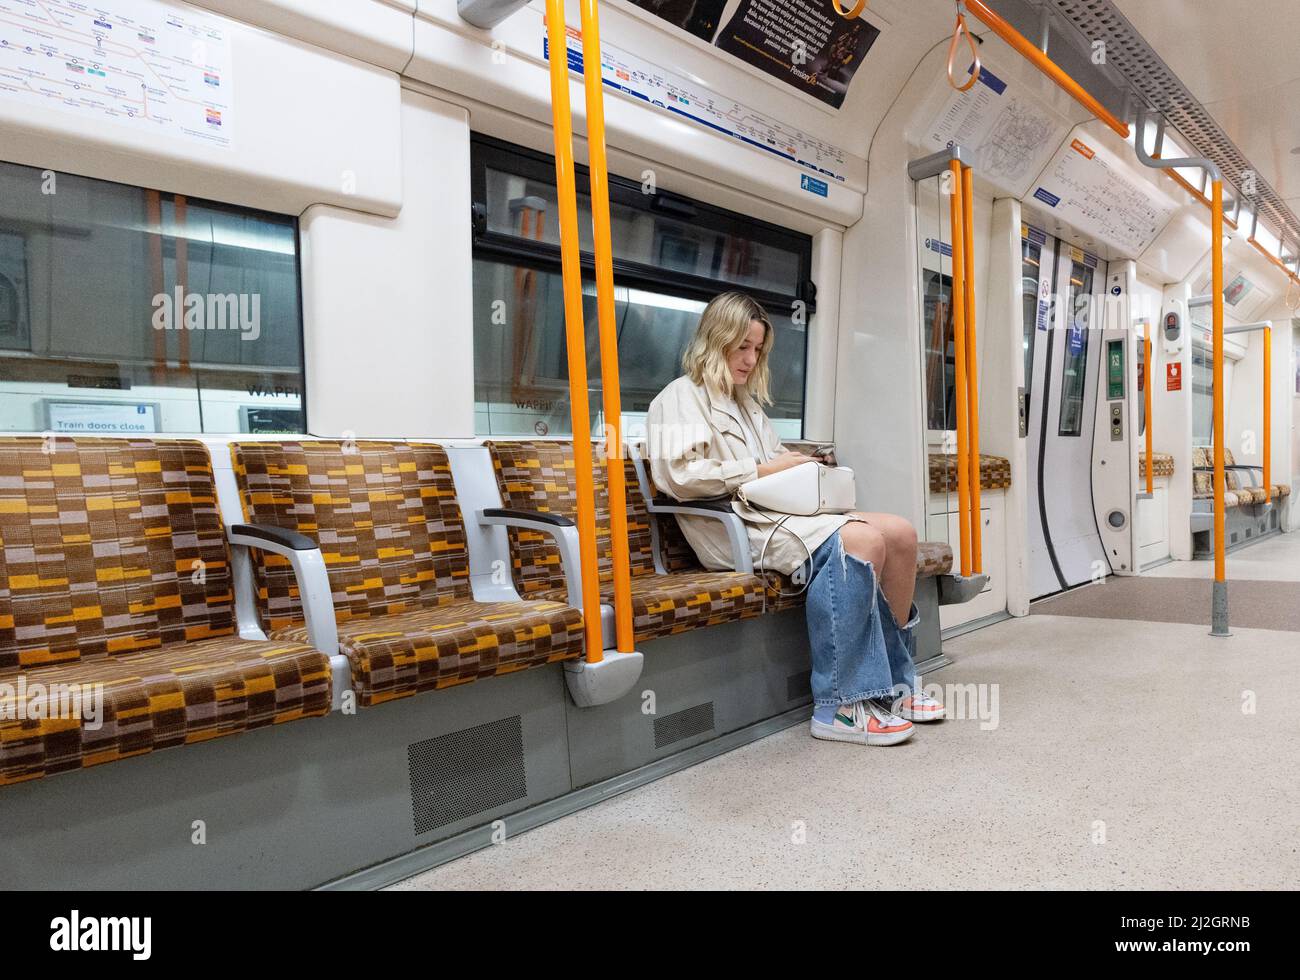 Women travelling train; A woman travelling alone sitting  in a train carriage interior, London overground, TFL, London UK Stock Photo